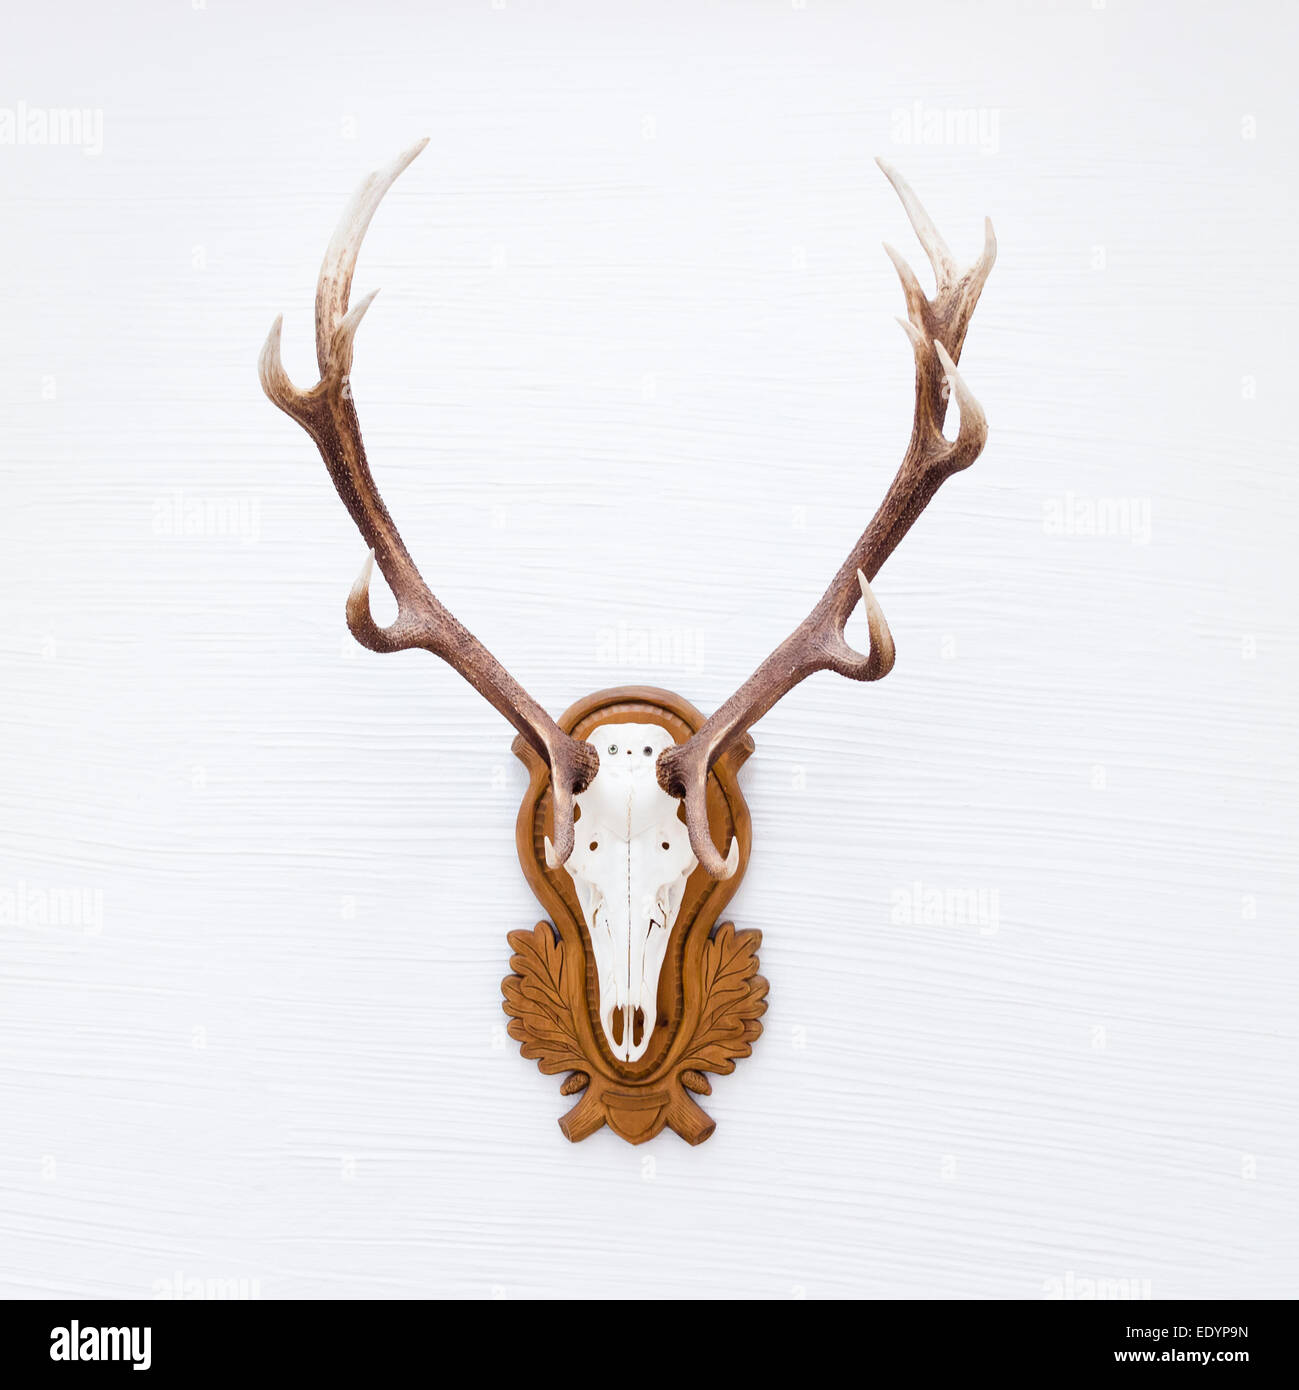 Antlers of a huge stag on white wall. Stock Photo